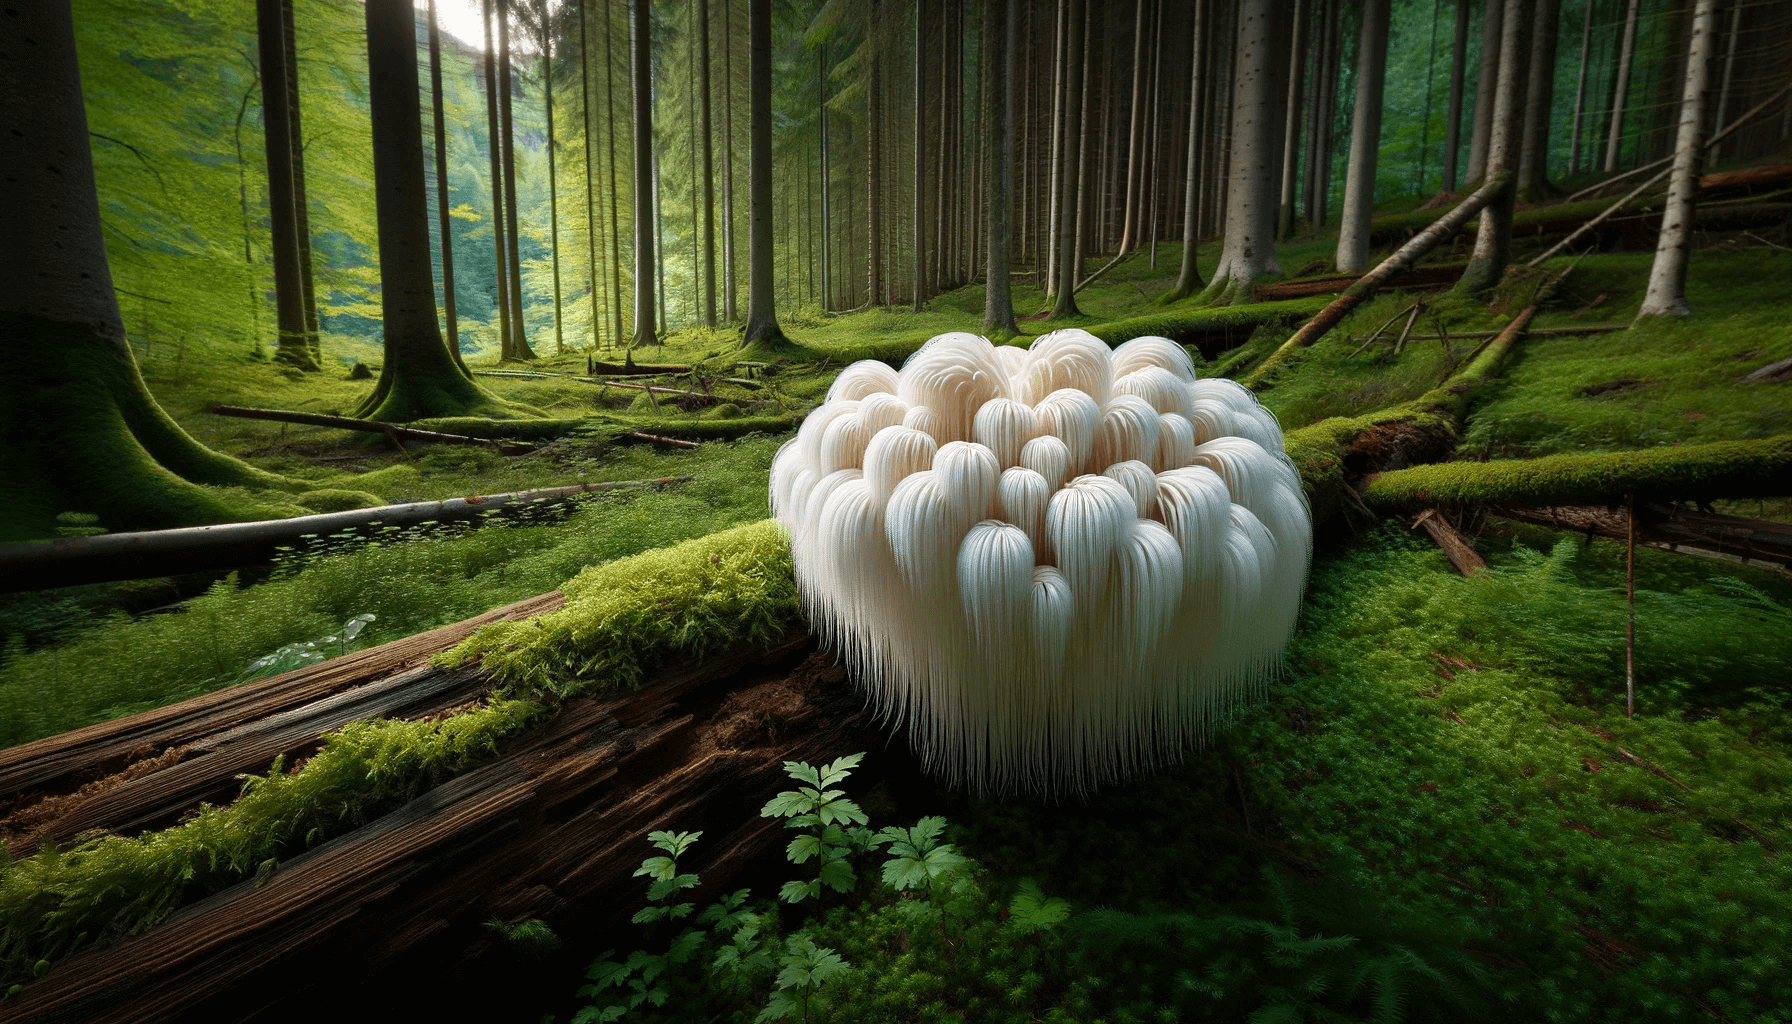 White Lion's Mane mushroom grows on the side of a decaying log. The lush green forest surrounds it, with the mushroom's unique texture and color standing out.